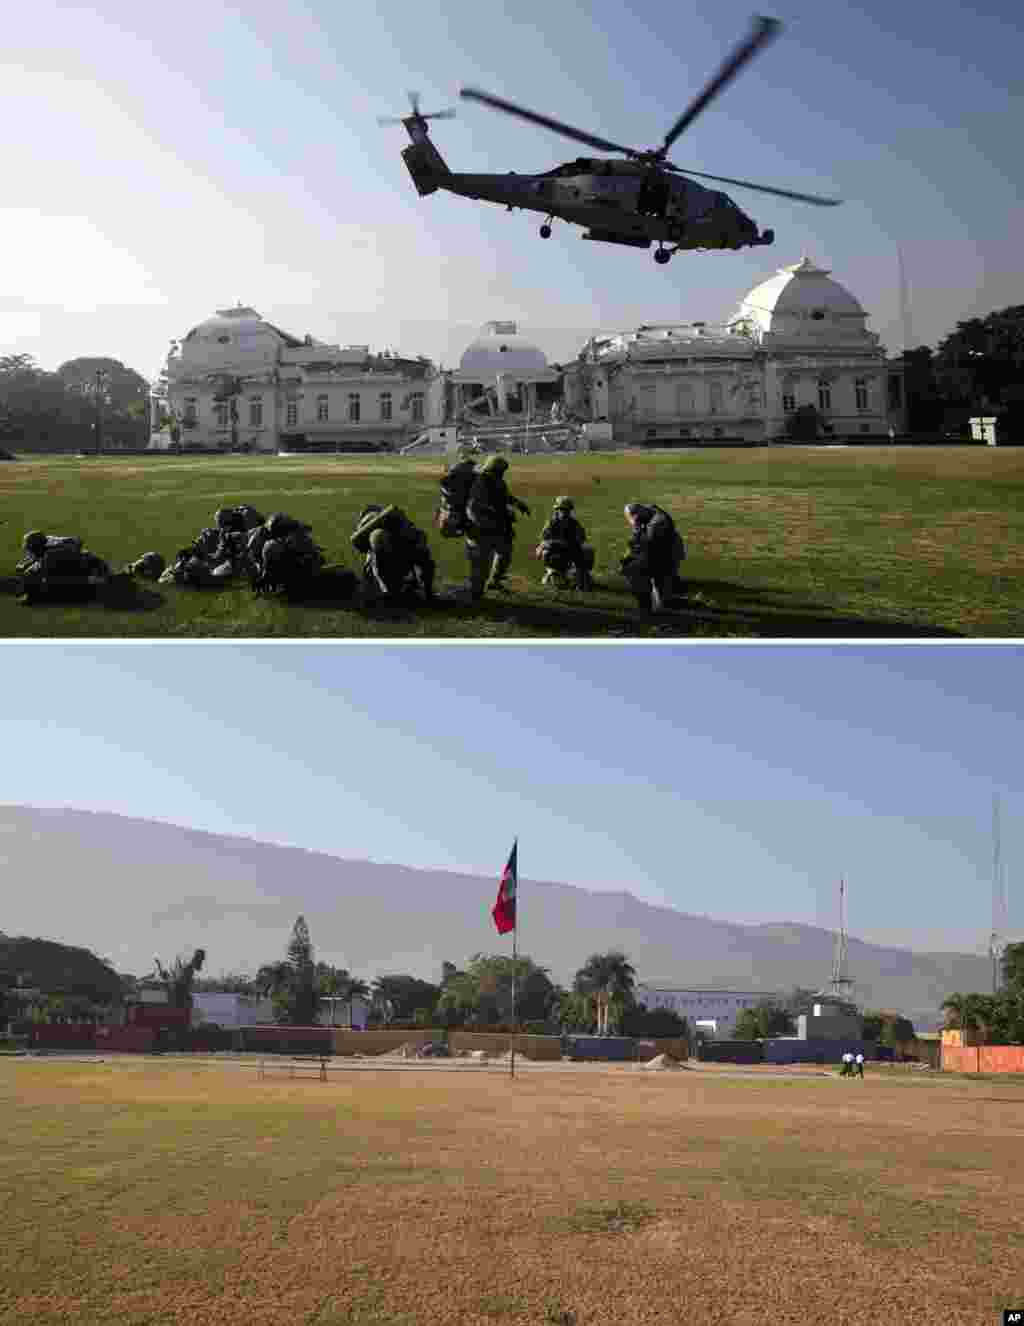 FILE - At top, Jan. 19, 2010, a U.S. Navy helicopter taking off outside the partially collapsed National Palace one week after the earthquake struck Port-au-Prince; below, Jan. 10, 2015, the structure was razed and a lone Haitian flagpole remains.